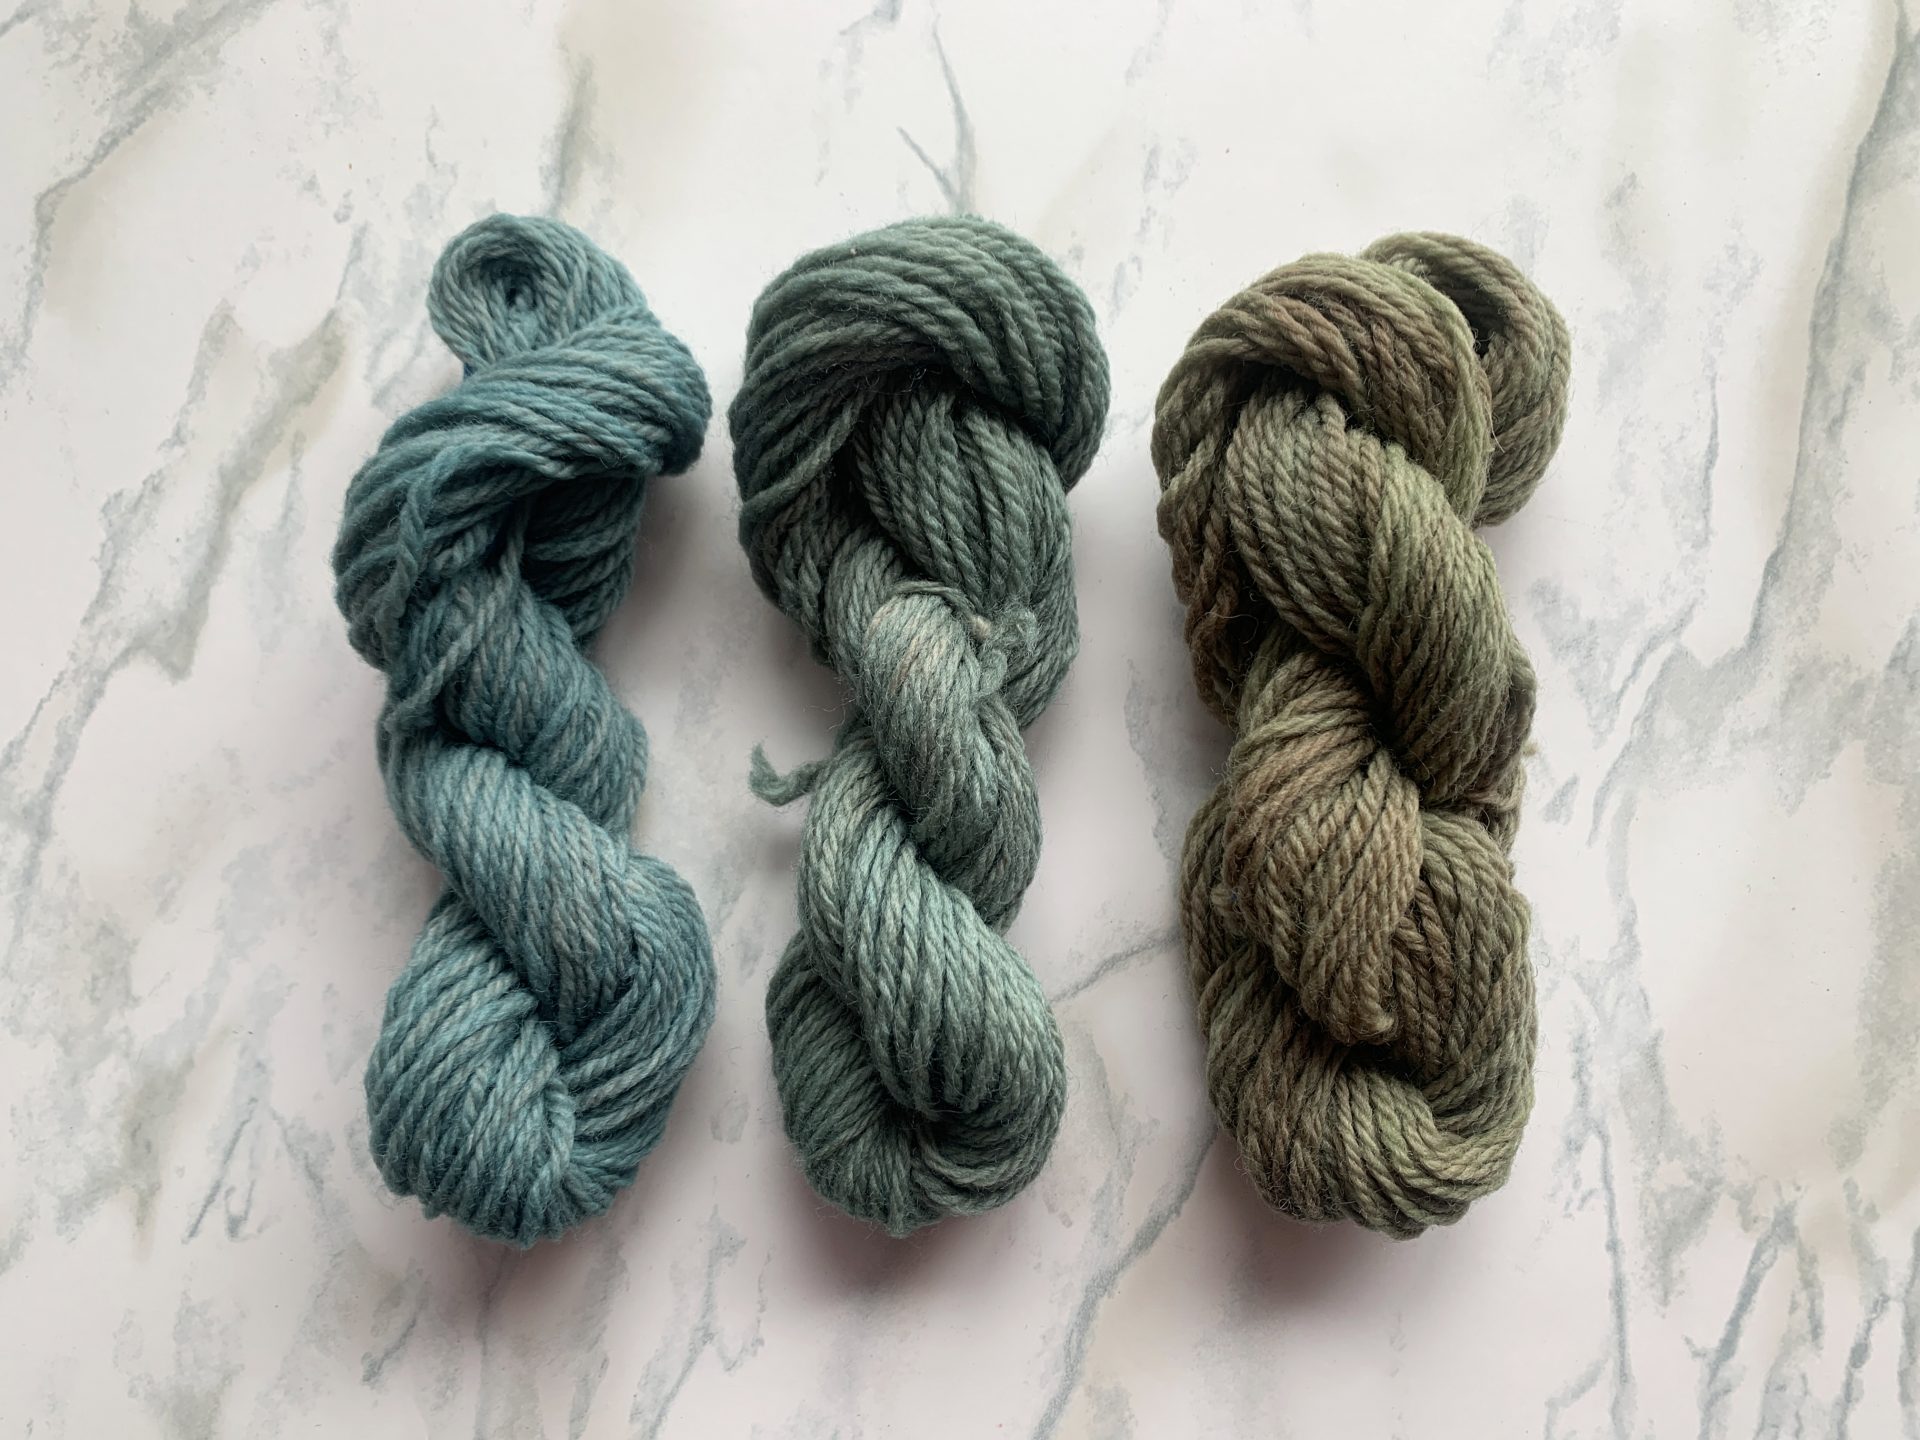 three skeins of blue and gray yarns on a marble background